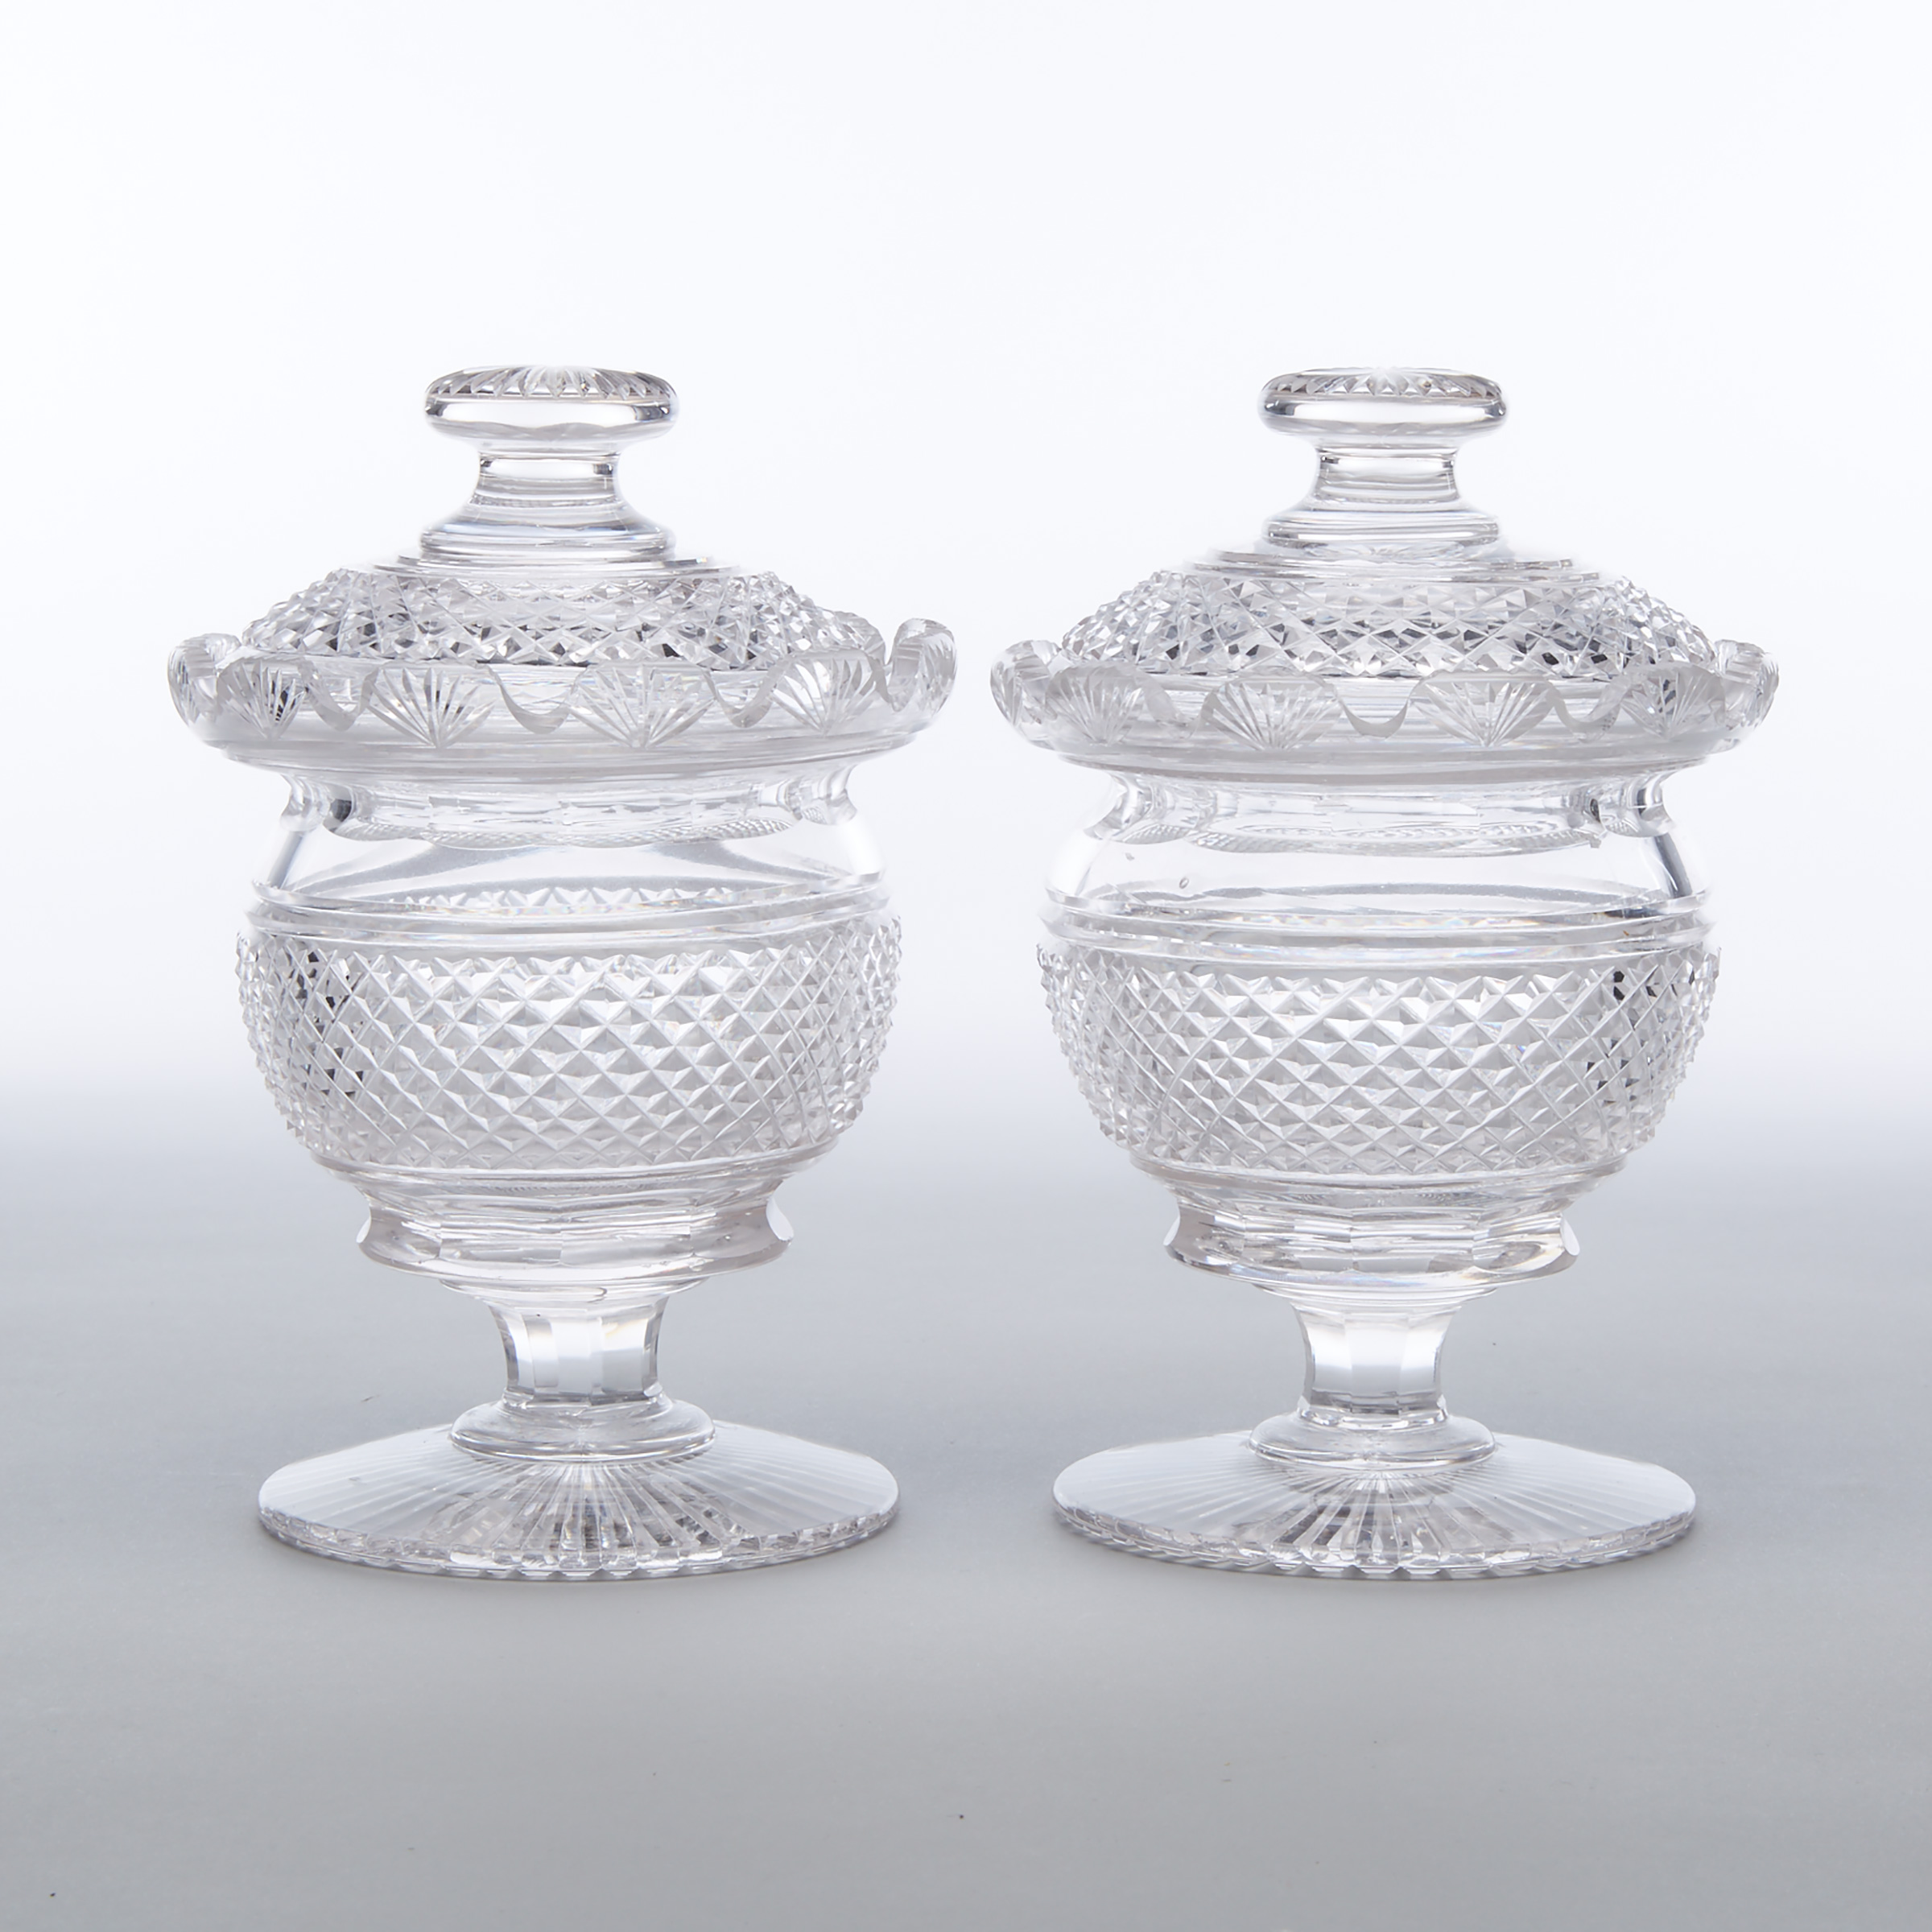 Pair of Anglo-Irish Cut Glass Covered Sweetmeat Vases, 19th century